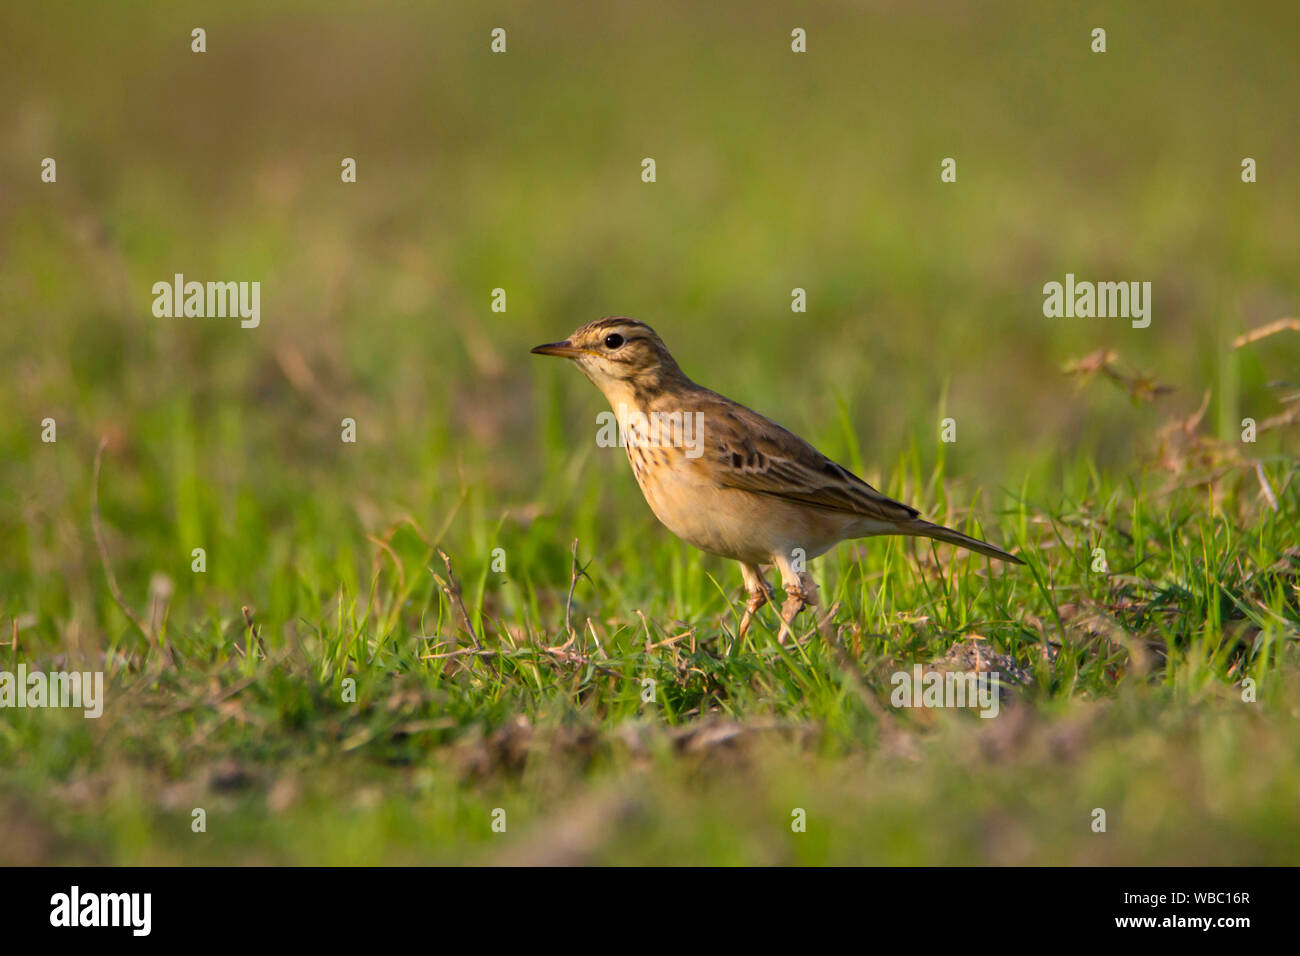 Paddy field pipit or Oriental pipit, Anthus rufulus, India. Stock Photo